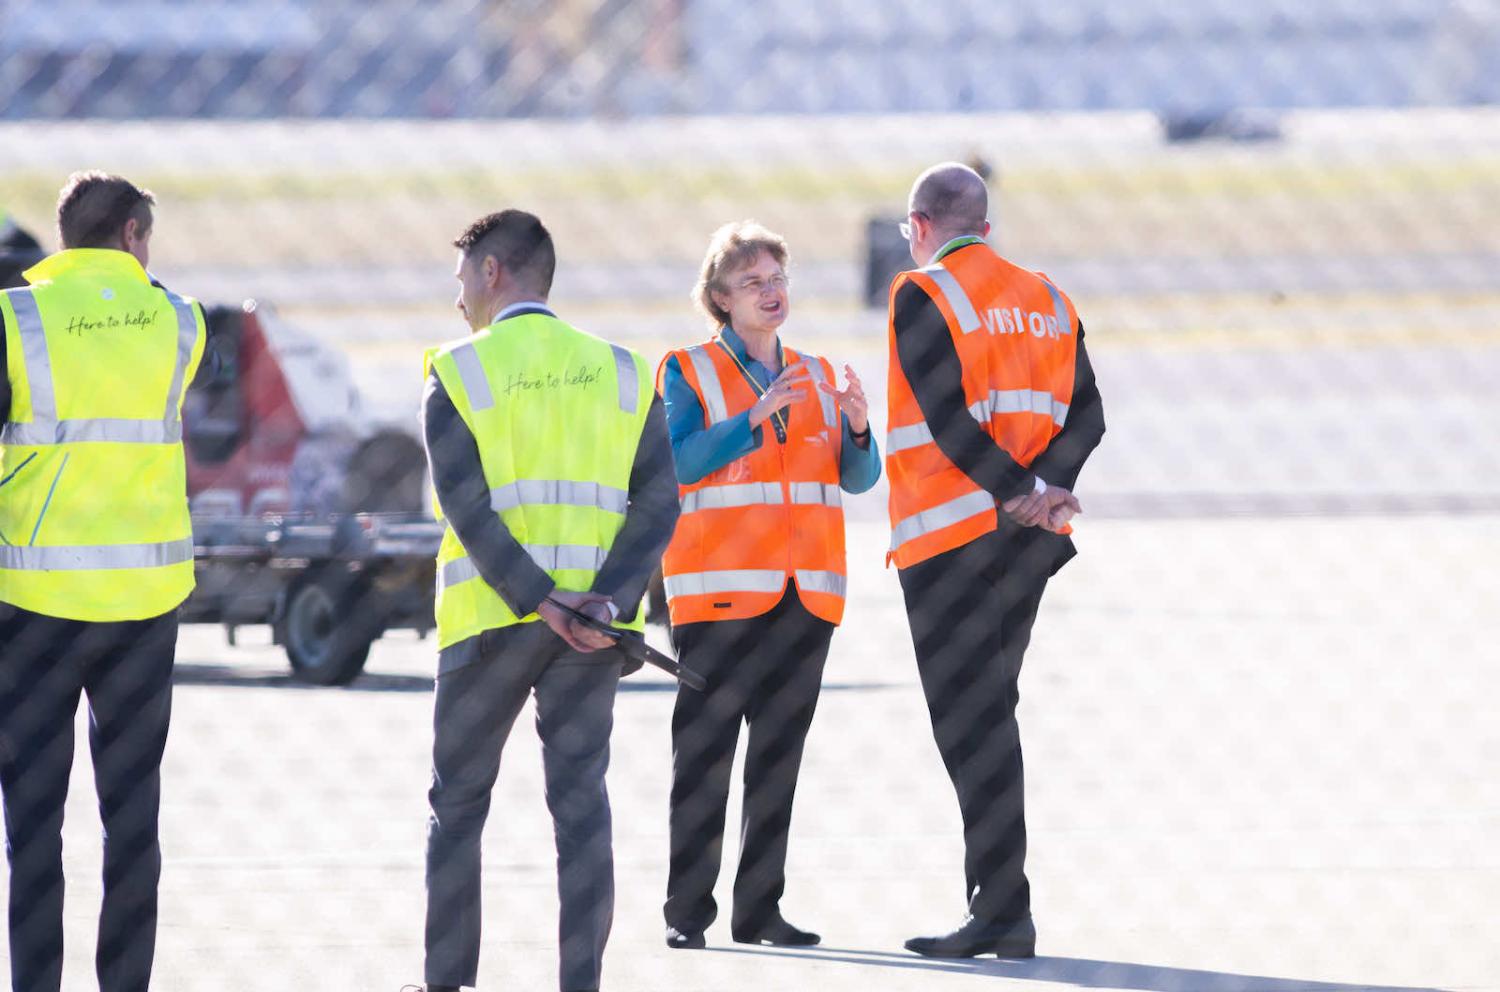 Frances Adamson, then secretary of the Department of Foreign Affairs and Trade, at Canberra Airport waiting for Covid-19 repatriation flights in May 2020 (Rohan Thomson/Getty Images)